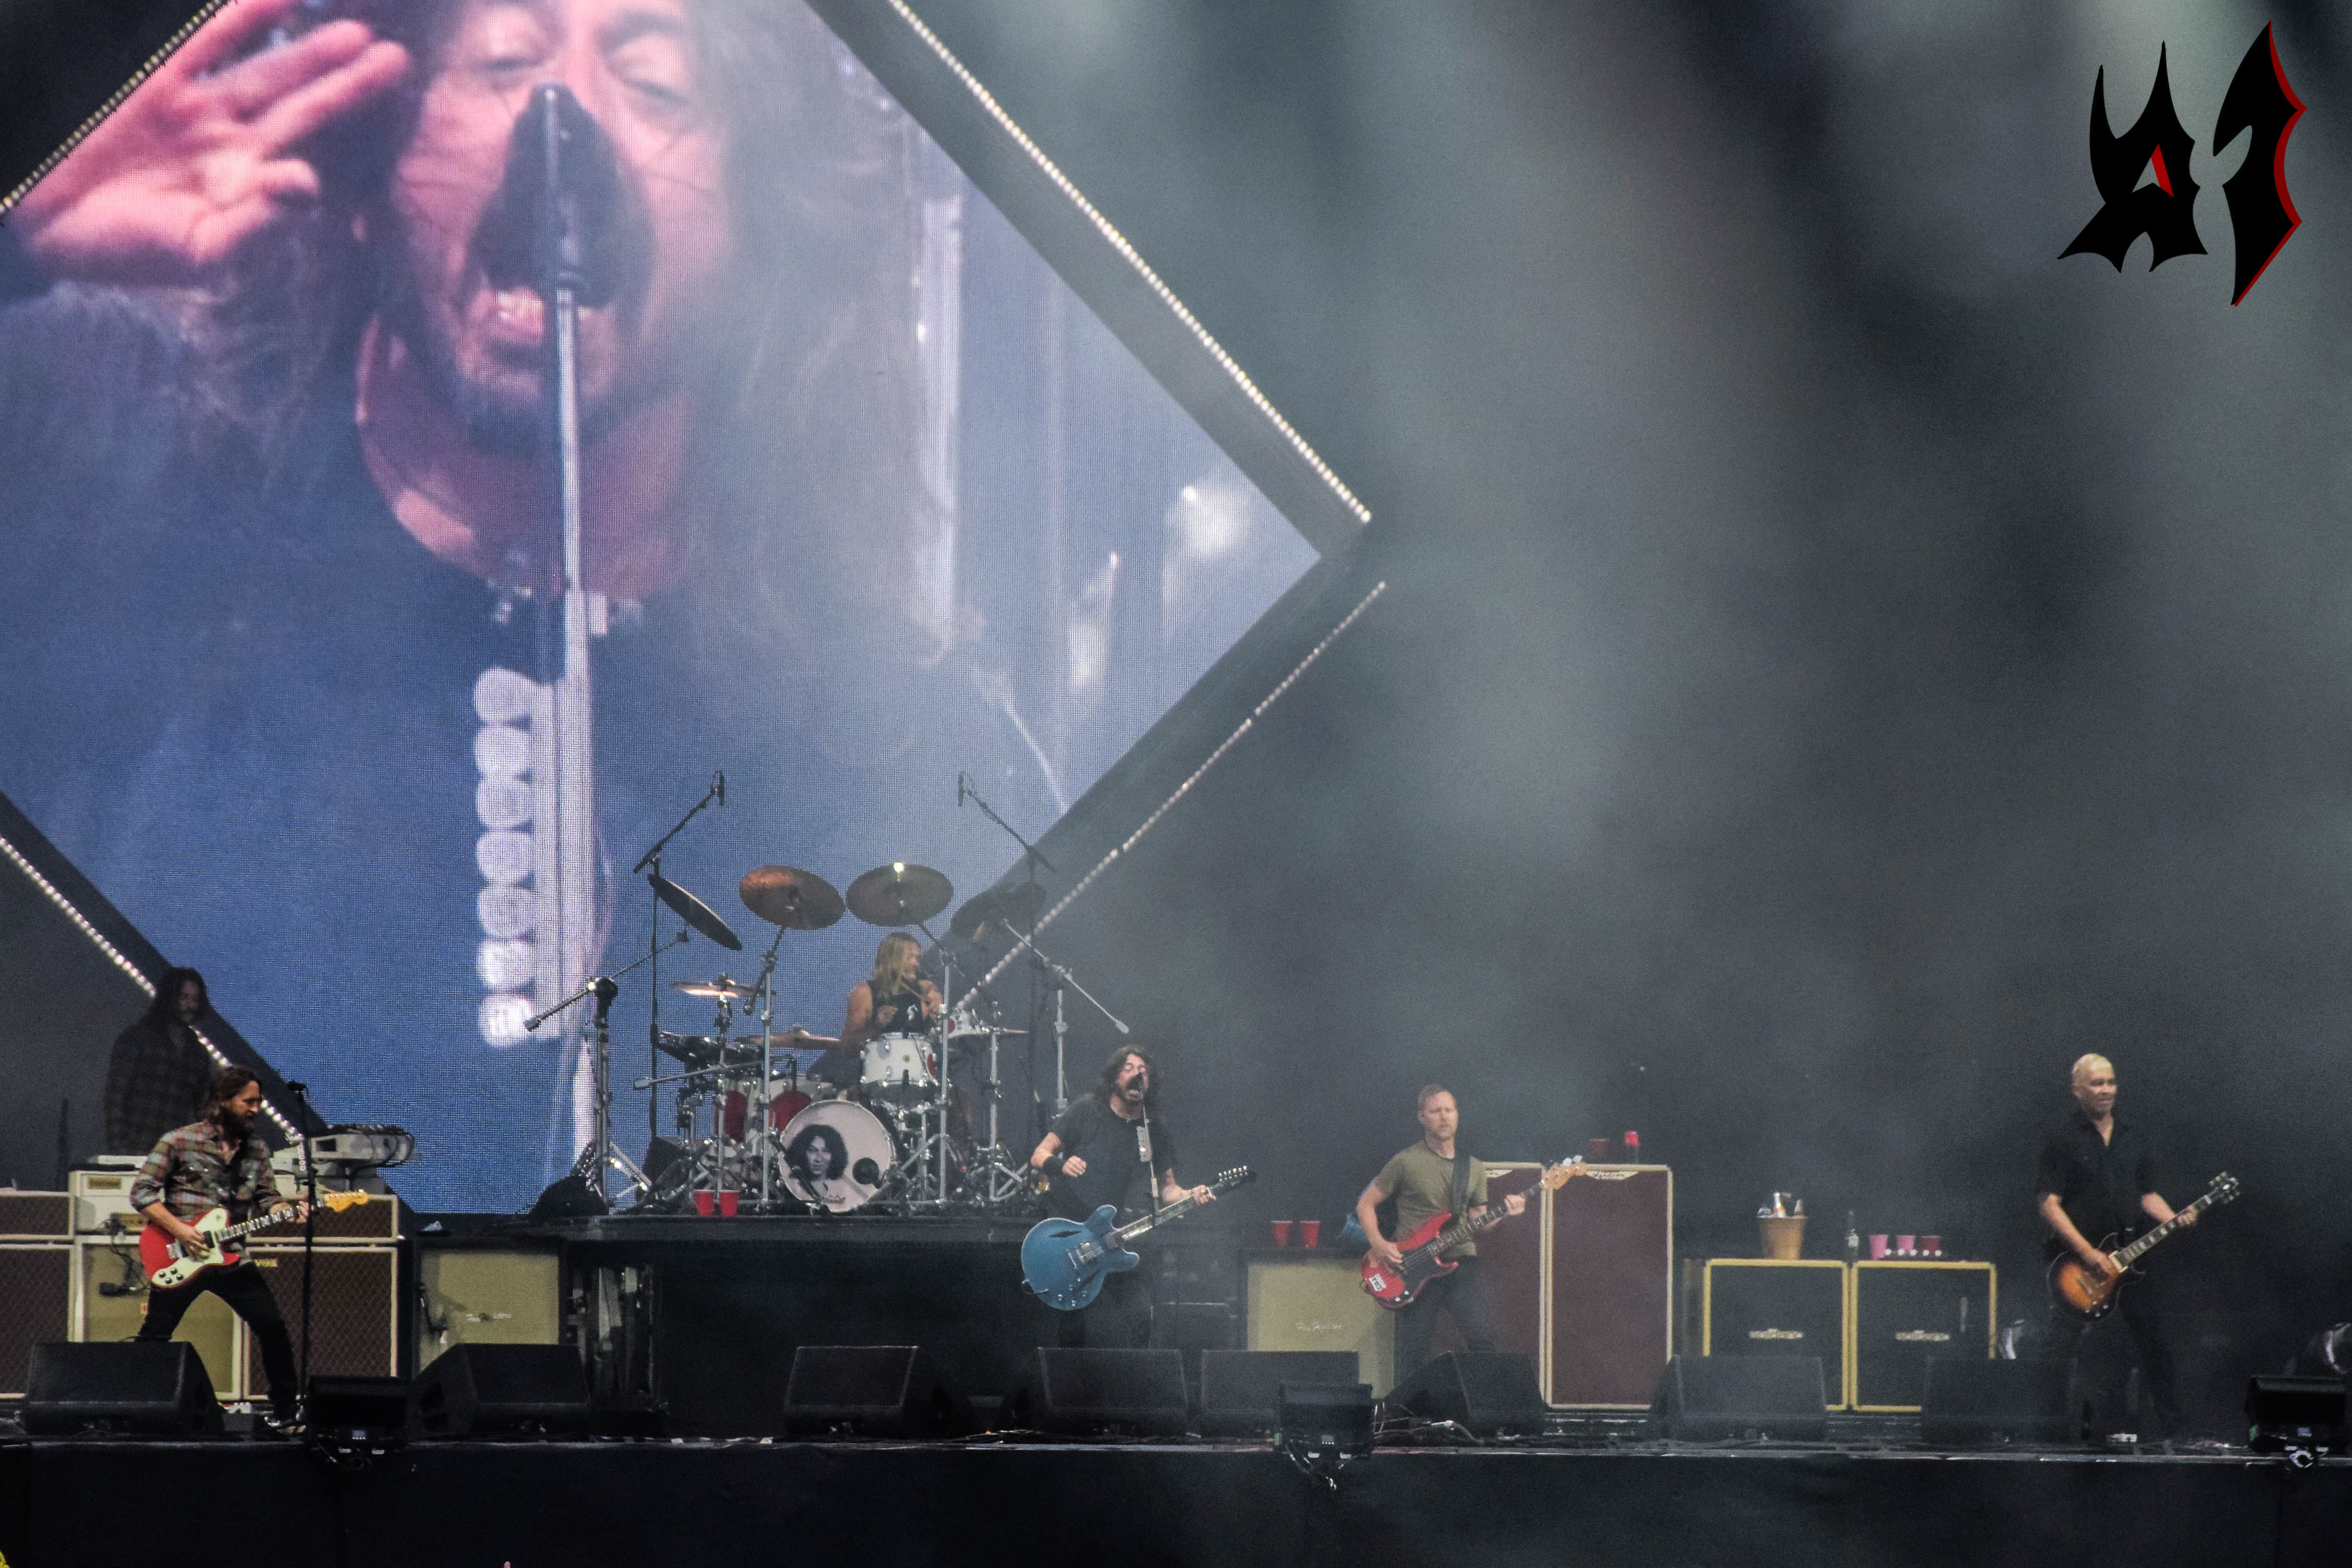 Donwload 2018 – Day 3 - Foo Fighters 2